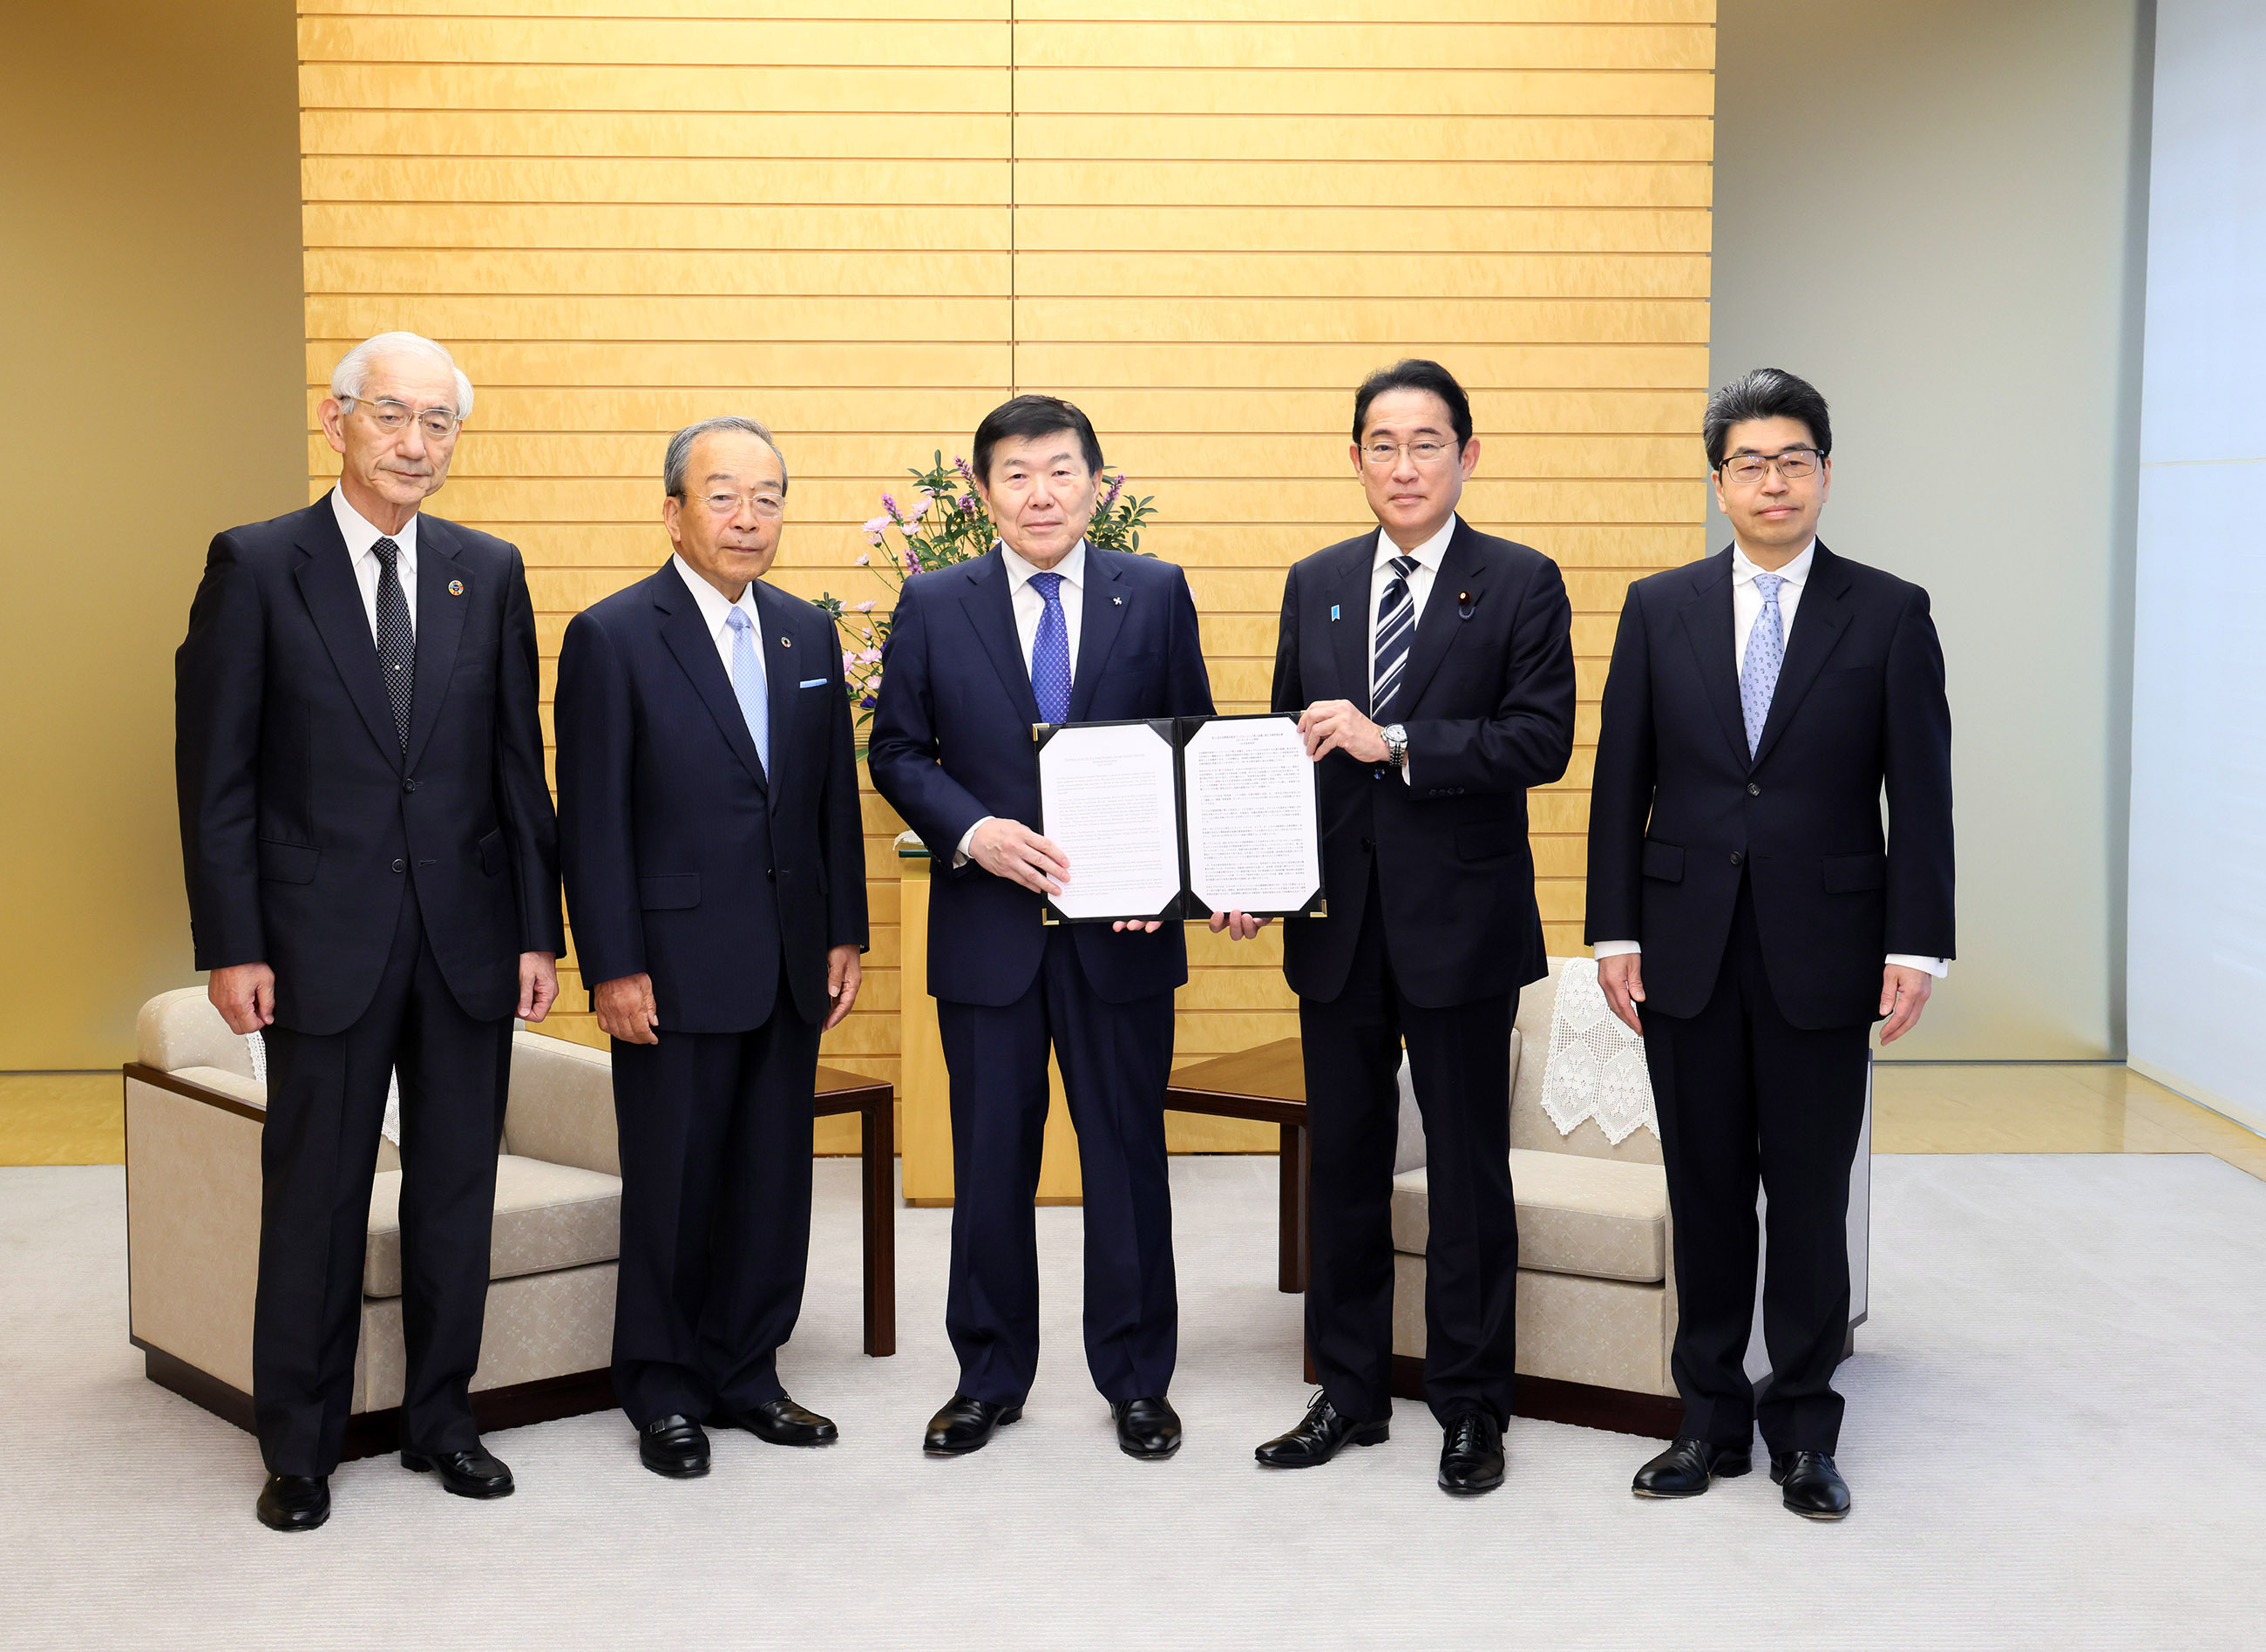 Courtesy Call from and Handing Over of the Proposal by Chairman Iijima and Other Members of the Wise-men Group on the Japan-Brazil Strategic Economic Partnership